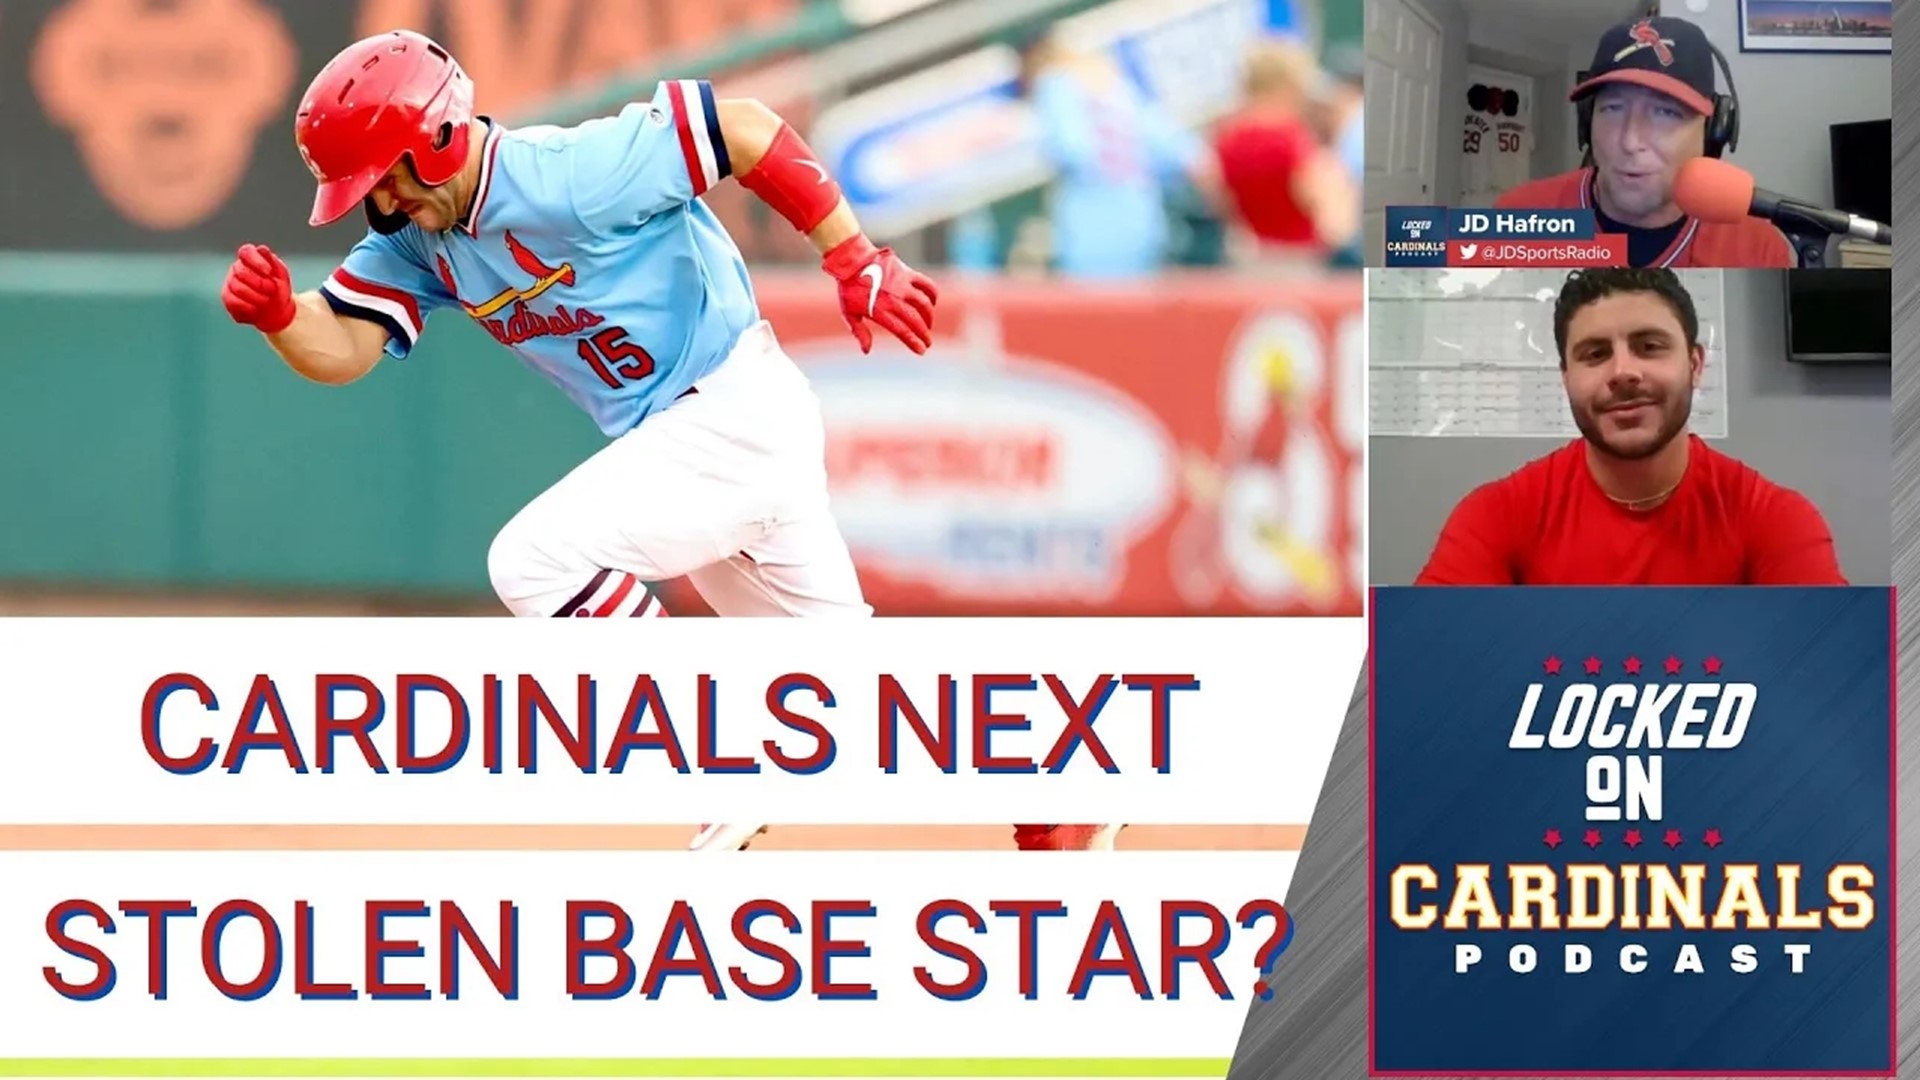 St. Louis Cardinals OF Prospect Mike Antico joins the show today! Willie McGee, Ozzie Smith, Tommy Edman all base stealers and the team's new weapon can swipe bags.